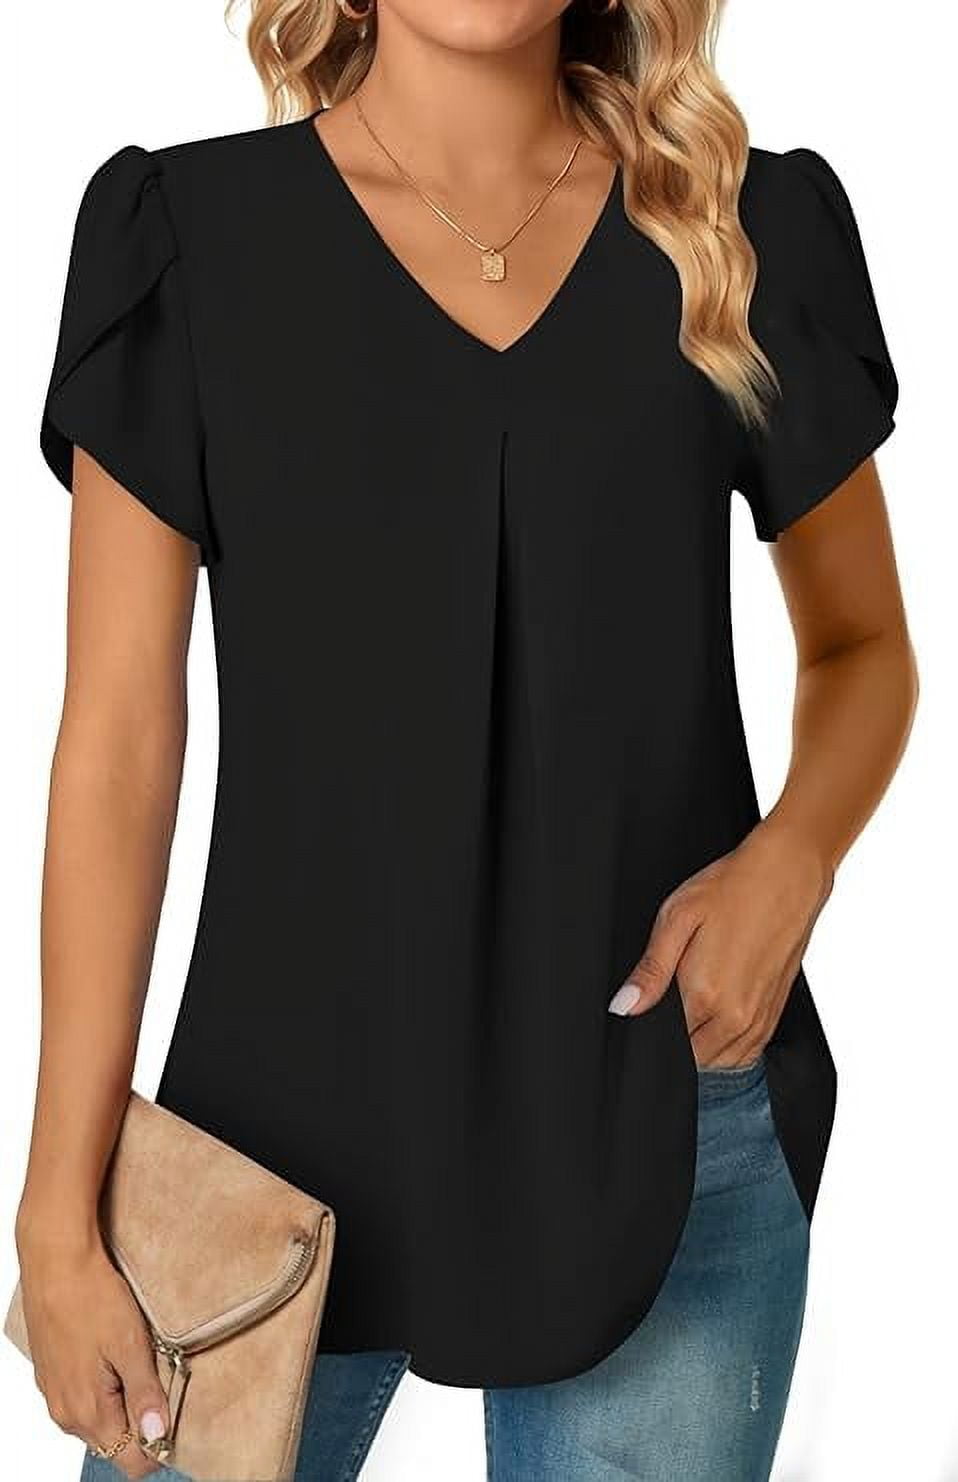 POPYOUNG Women's Summer Casual Short Sleeve Tunic Tops to Wear with Leggings  V-Neck T-Shirt Loose Blouse M, Stripe Black at  Women's Clothing store